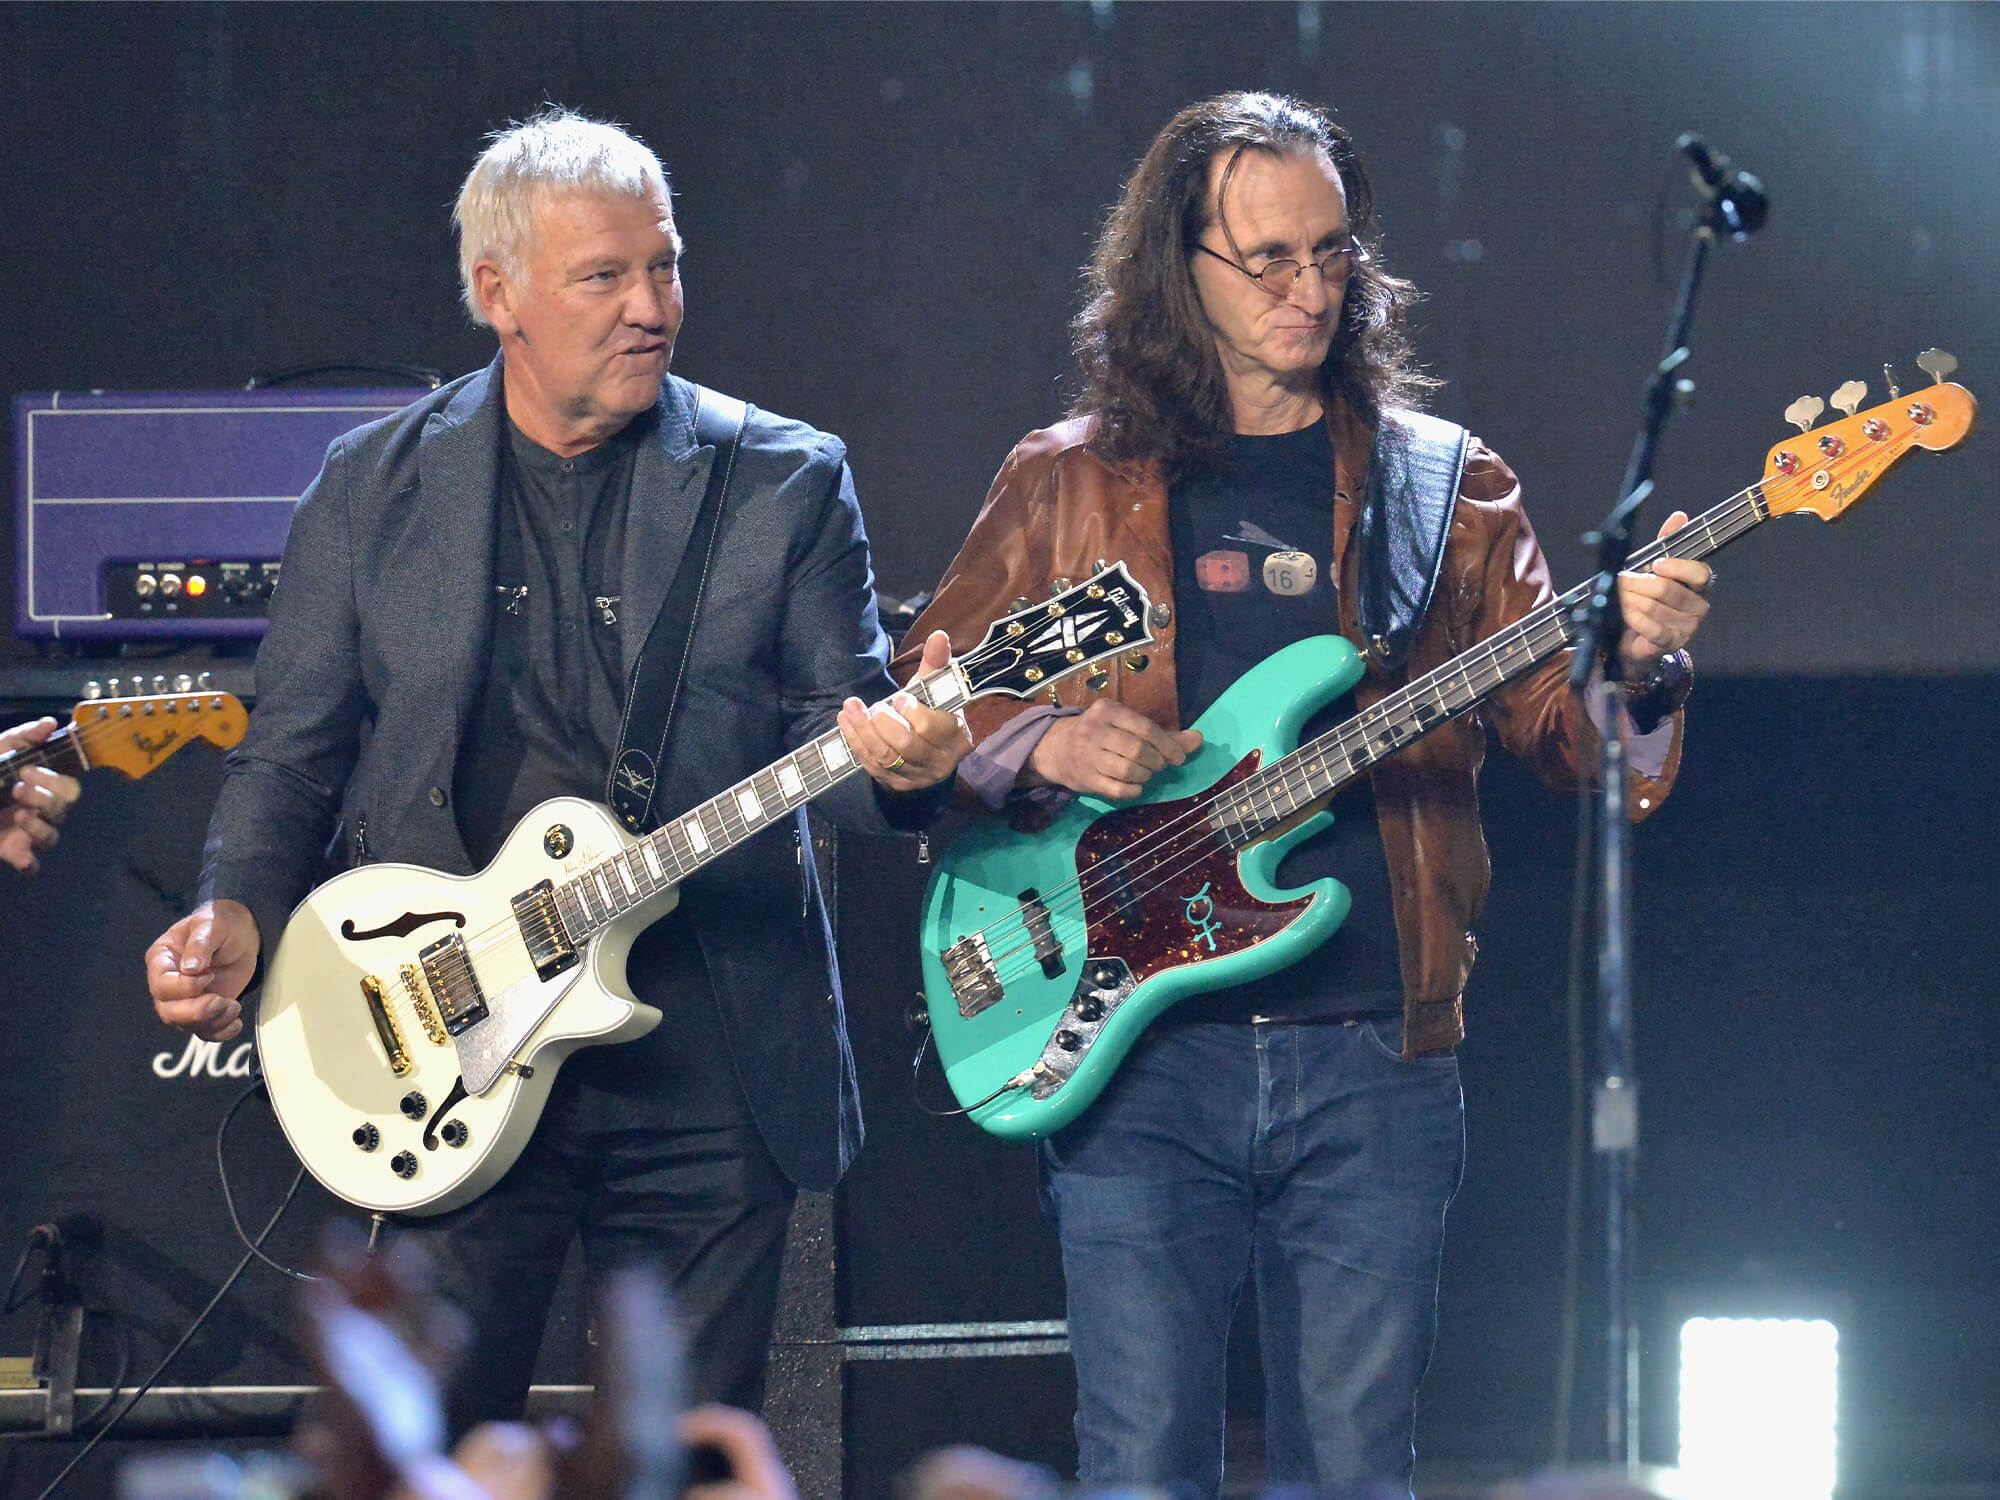 Alex Lifeson and Geddy Lee at Rock Hall. They both hold guitars in hand.